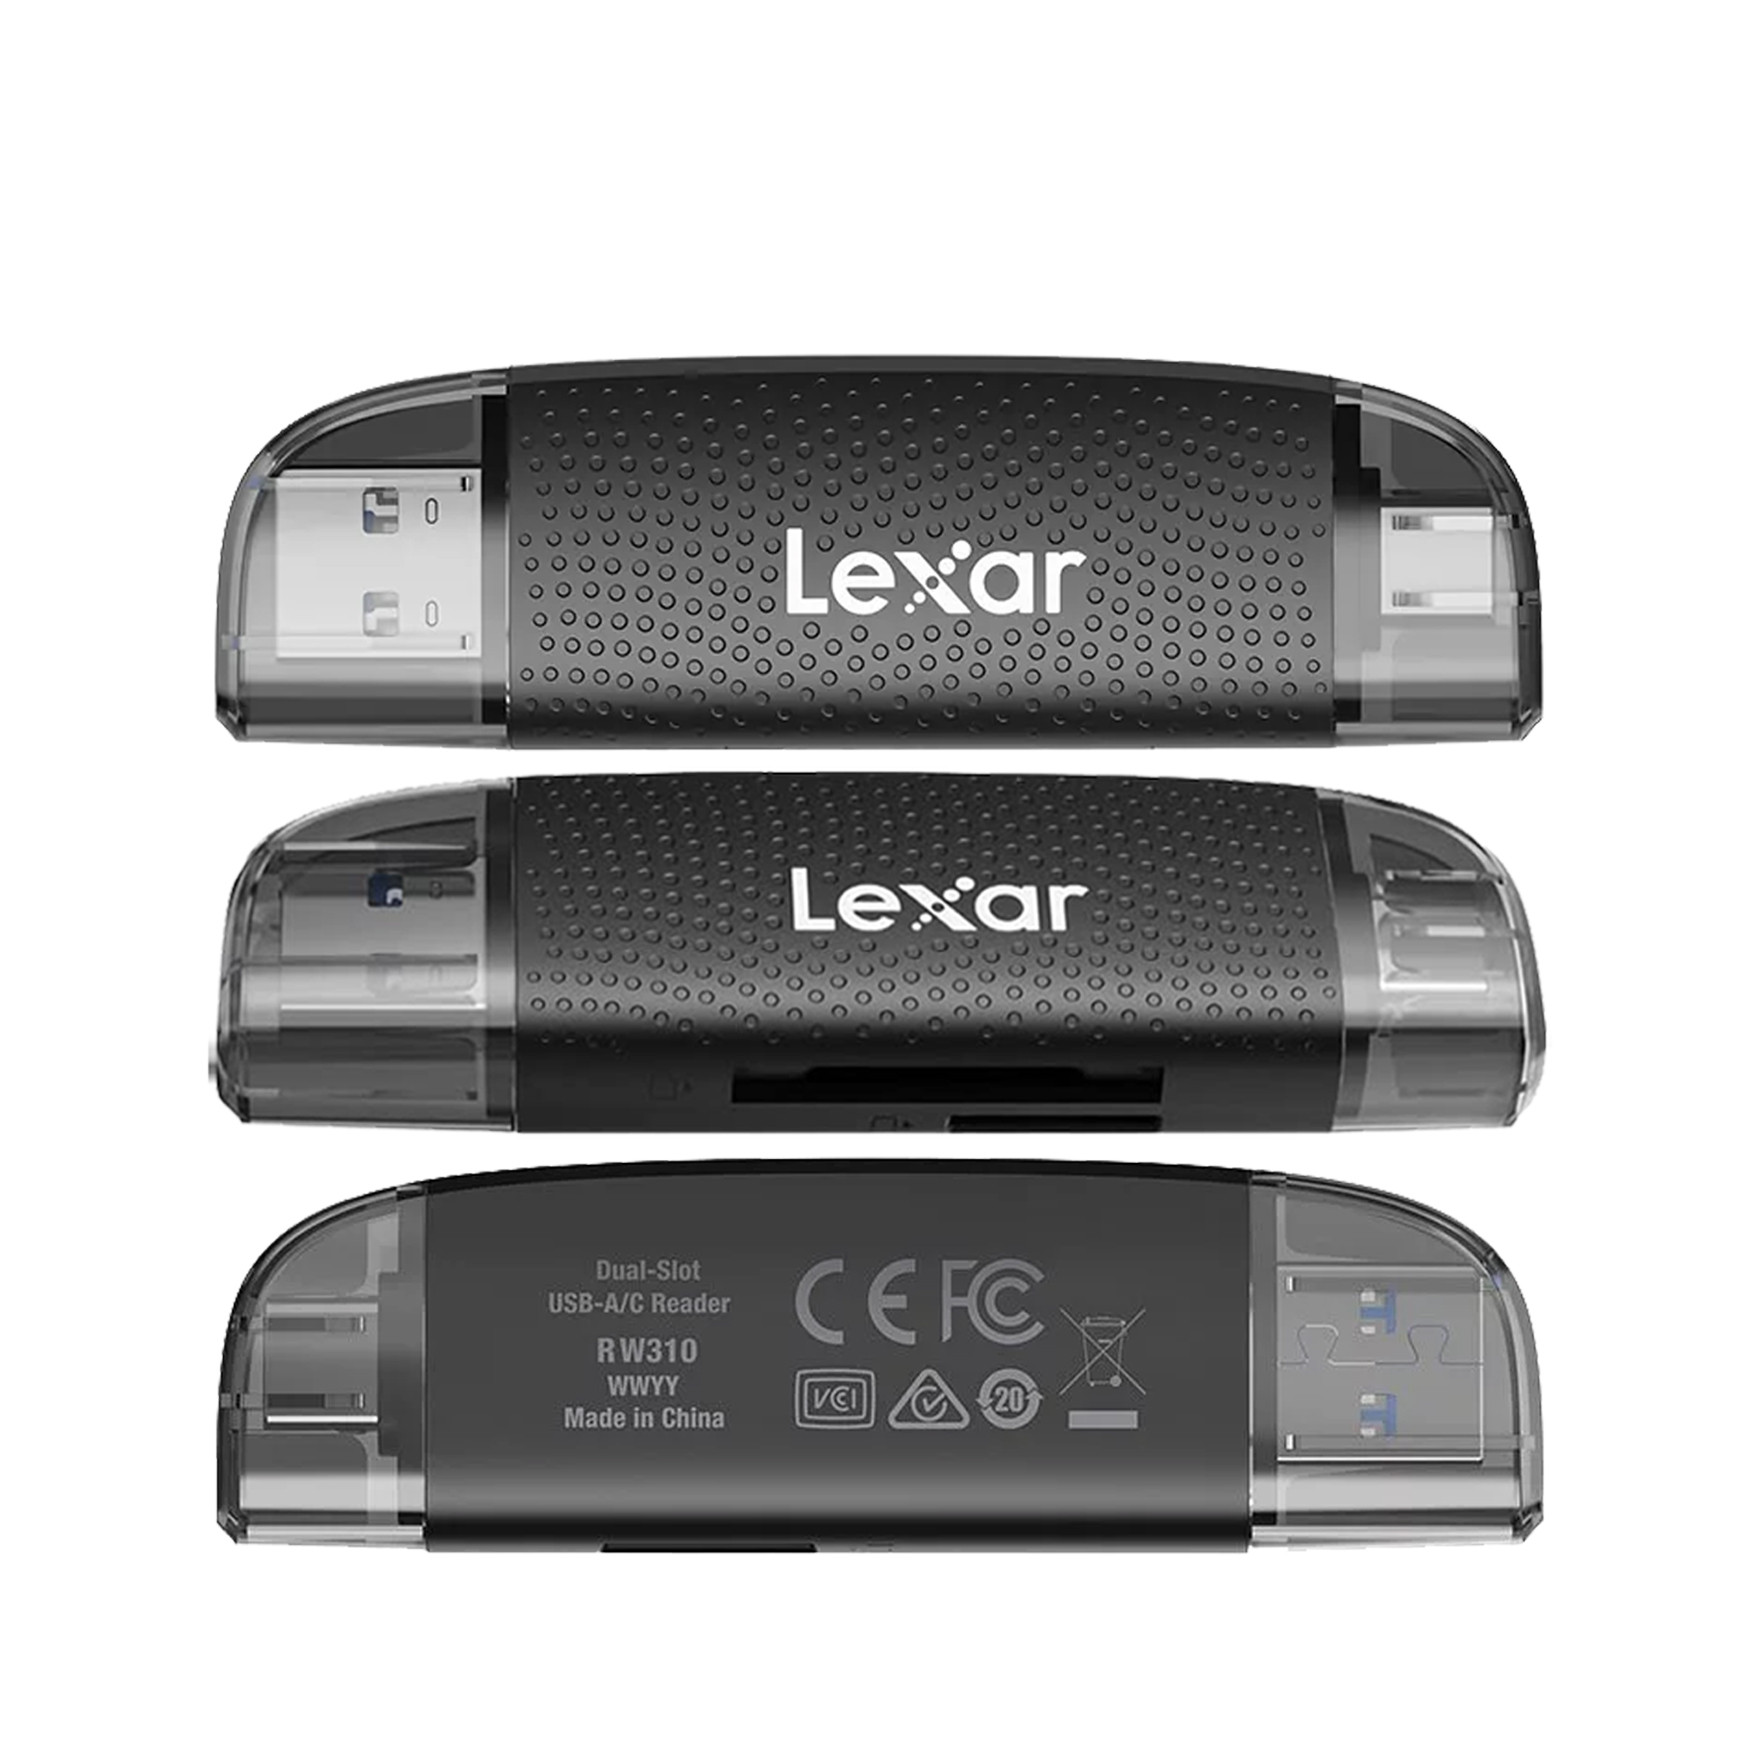 Lexar RW310 Memory Card Reader, USB 3.2 Gen 1 Up to 170MB/s Speeds 2 in 1  USB-C USB-A for SD/Micro SD/SDHC/SDXC Camera Card Reader Adapter, OTG Micro